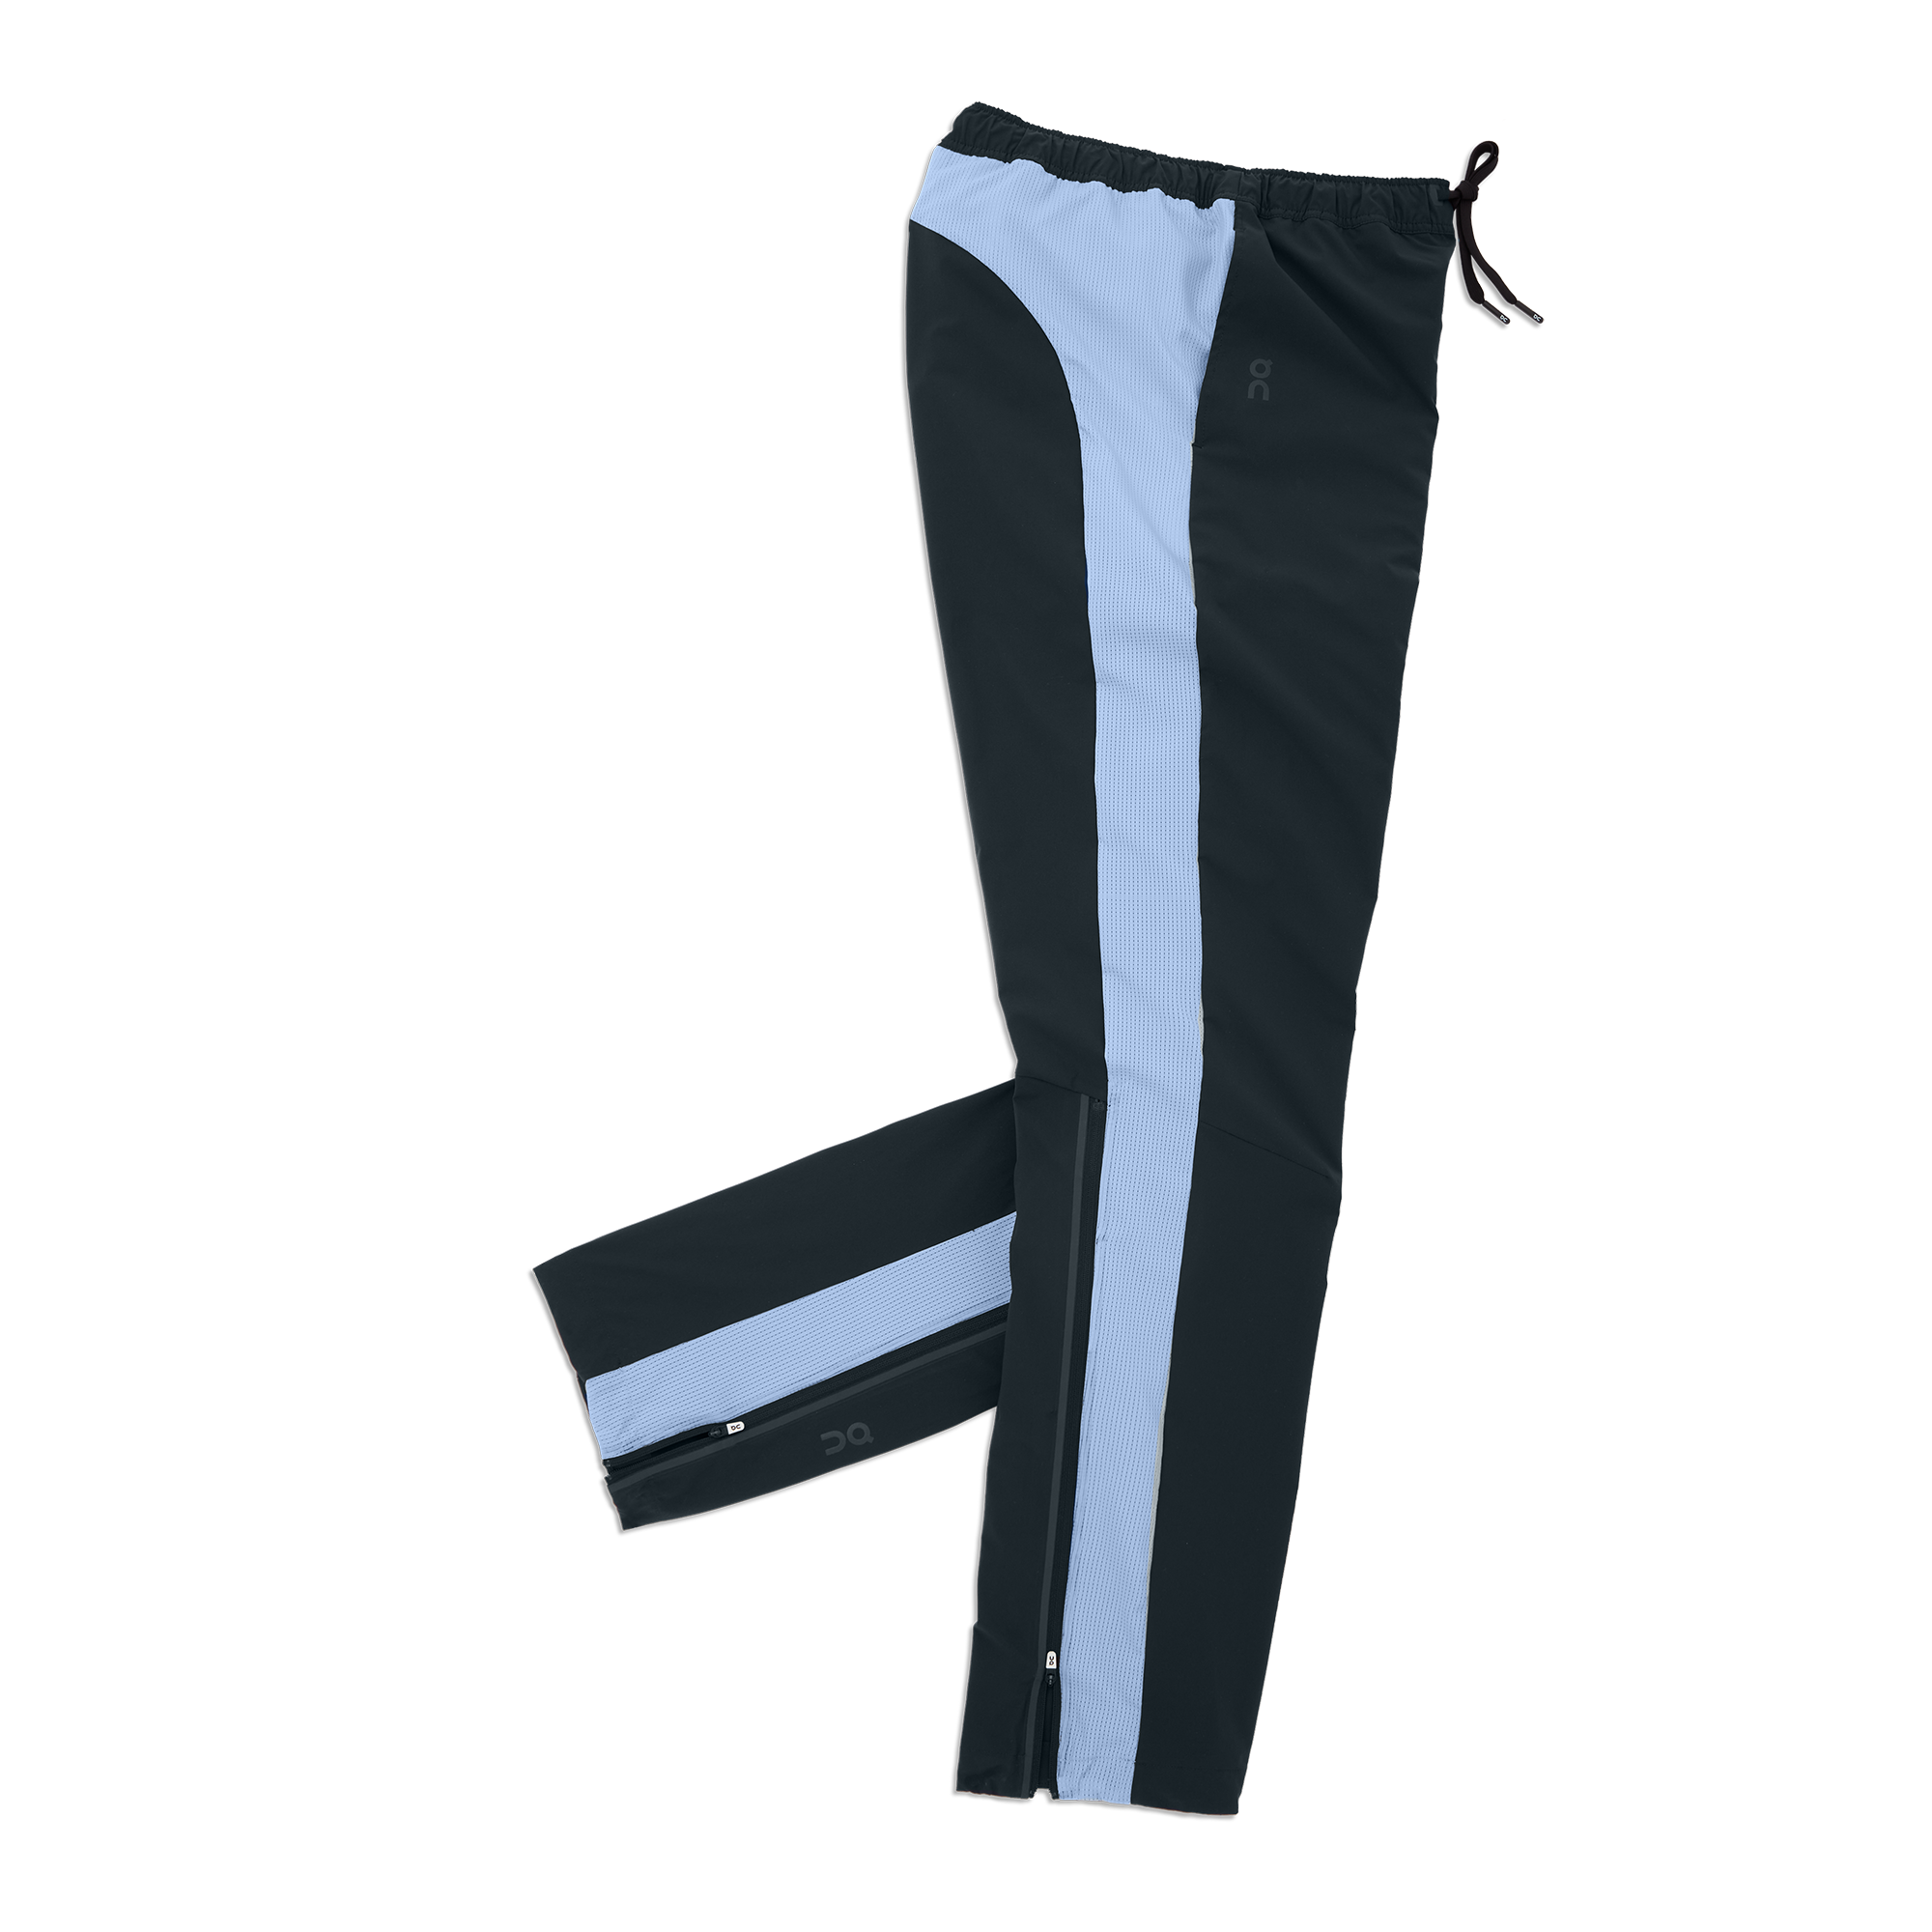 AmericanElm Navy Blue Women's Trackpants for Sports Gym